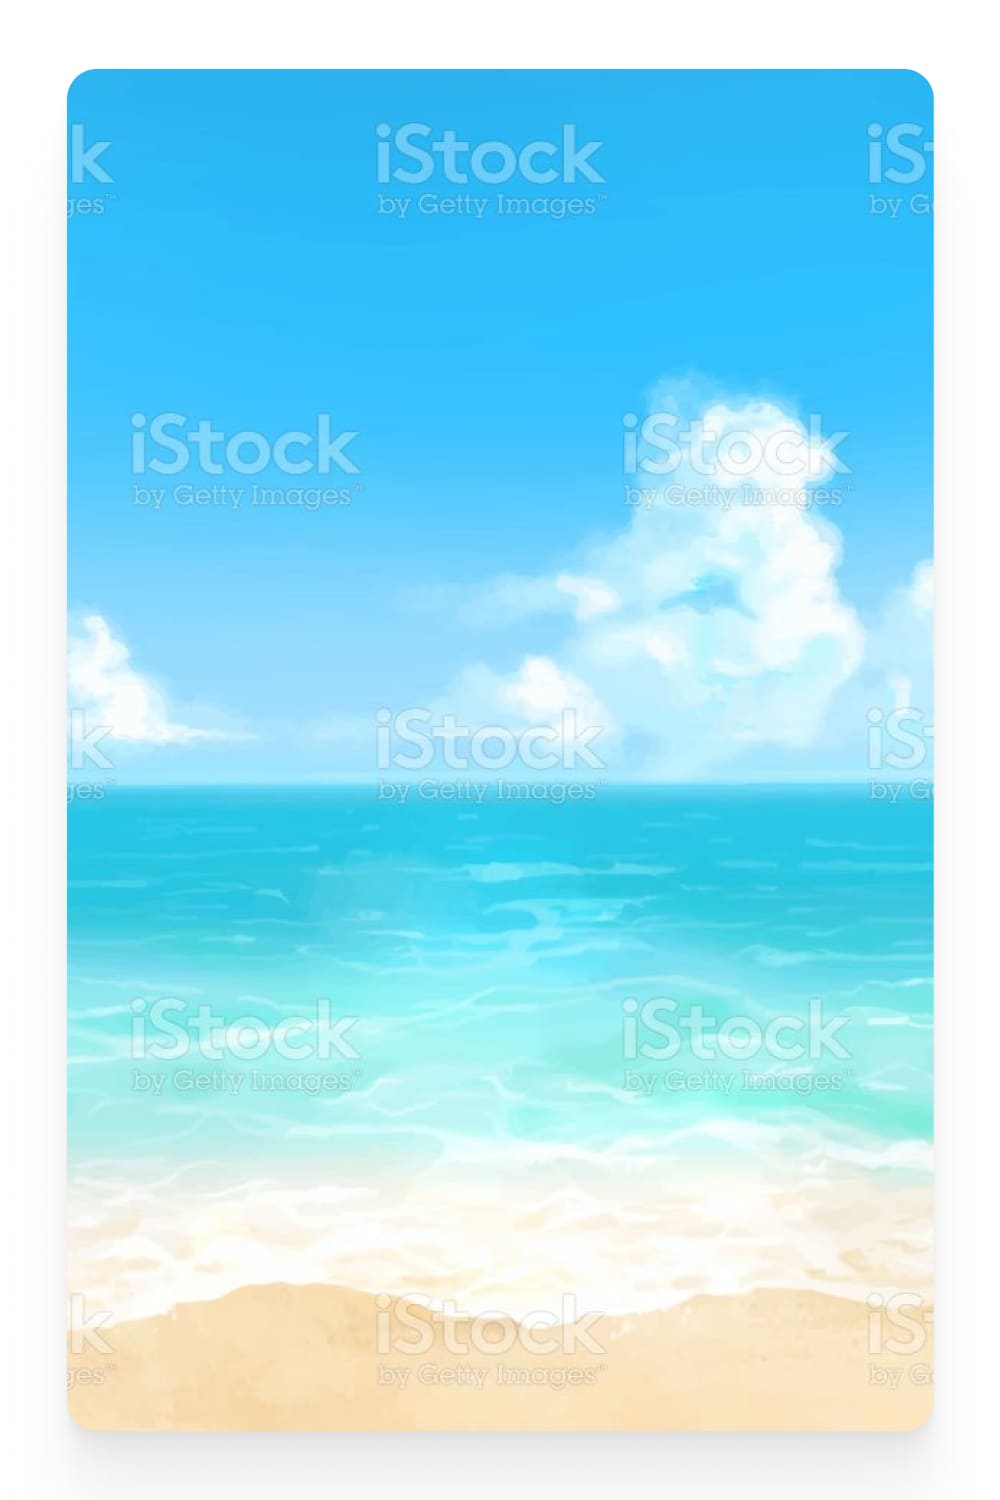 Photo of yellow sand, blue sea and blue sky with white clouds.